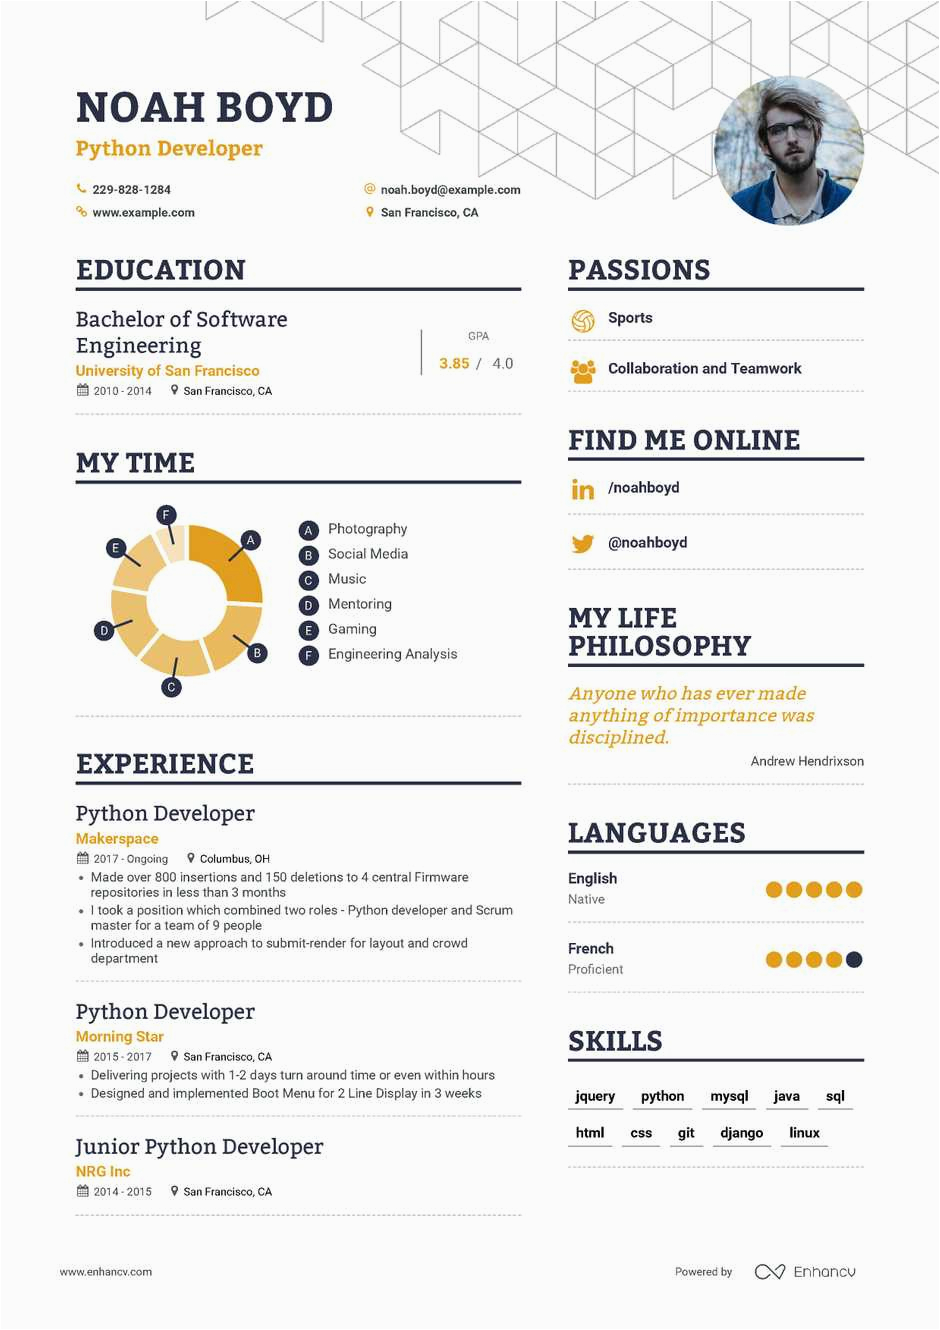 Sample Resume for Python Developer Fresher the Ultimate Interns and Freshers Resume format Guide for 2019